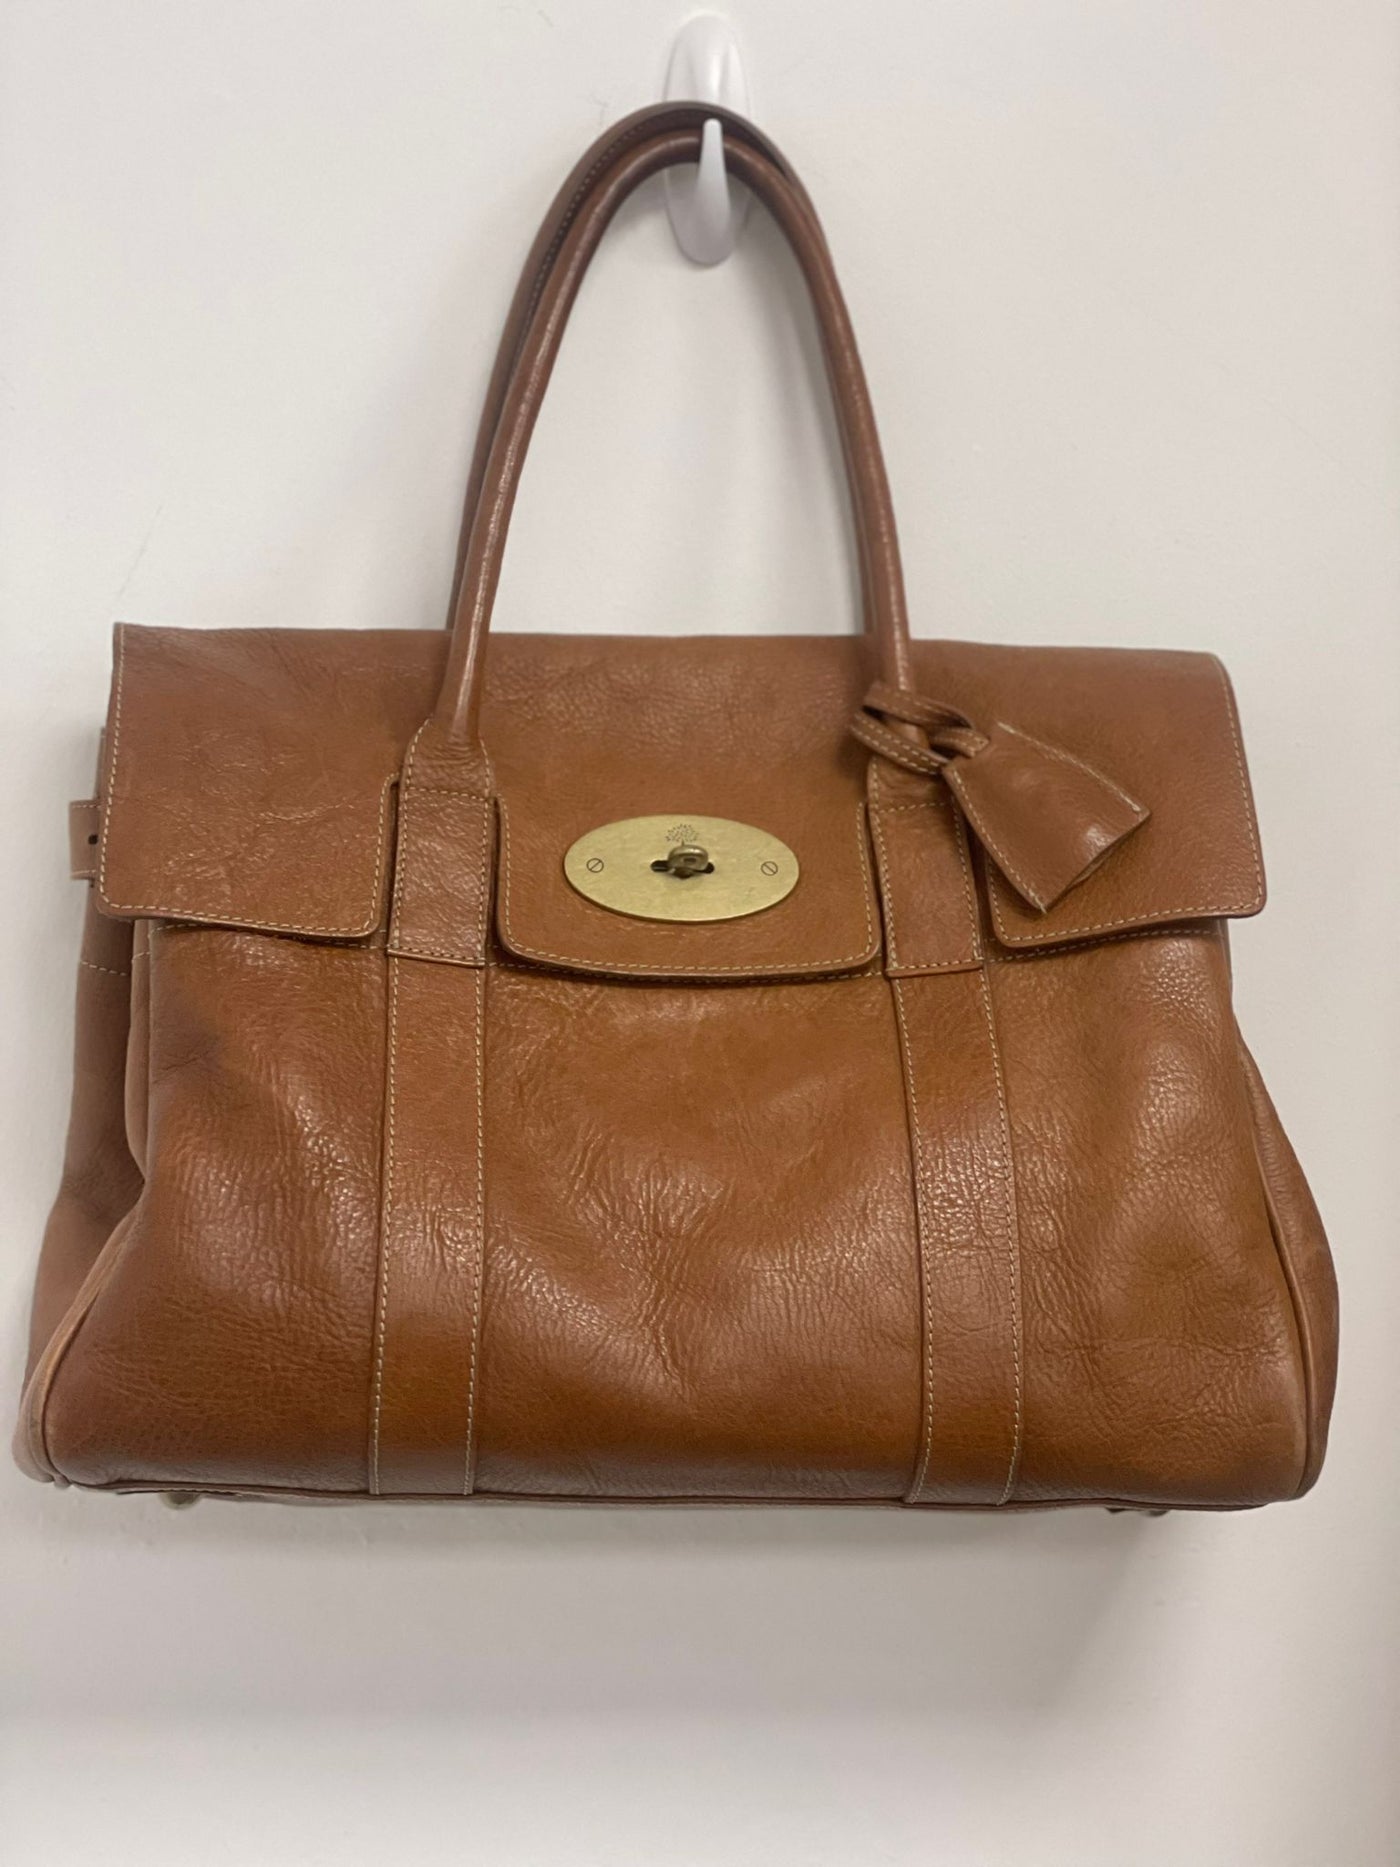 Mulberry bayswater tote bag oak natural leather